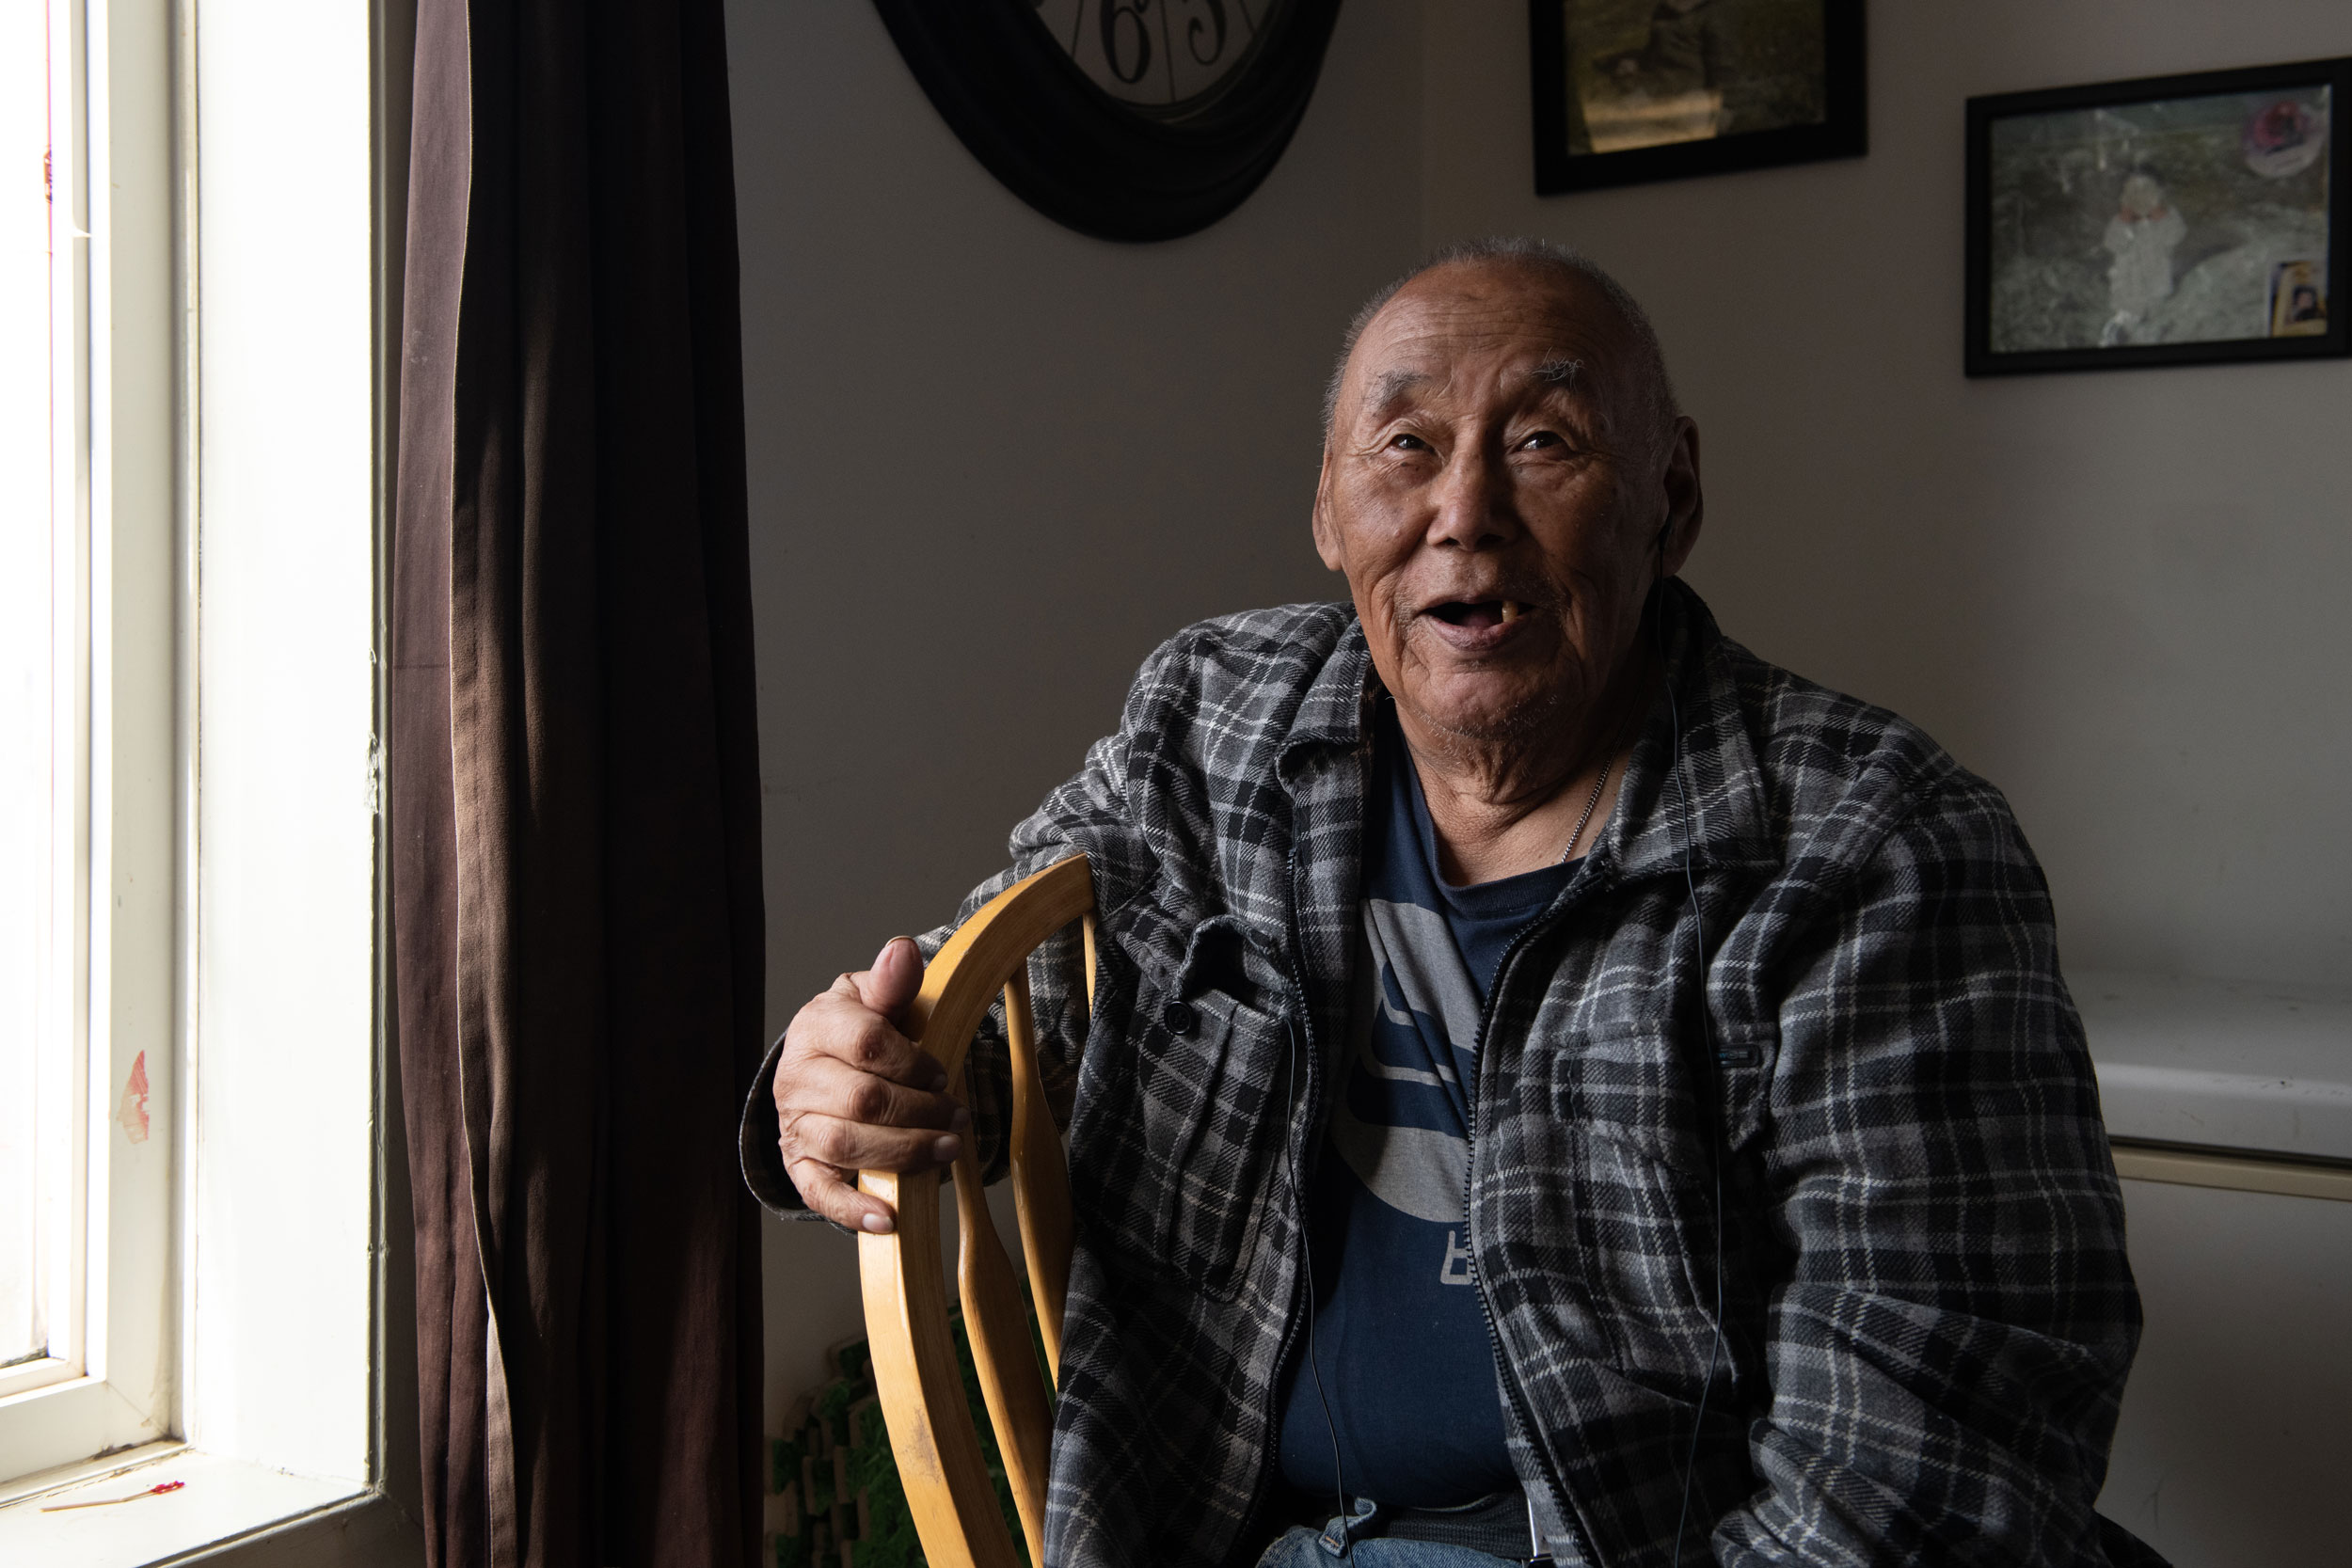 Elder Louis Angalik has watched the landscape around him shift over his 80-some years. The sea is getting shallower, he says.